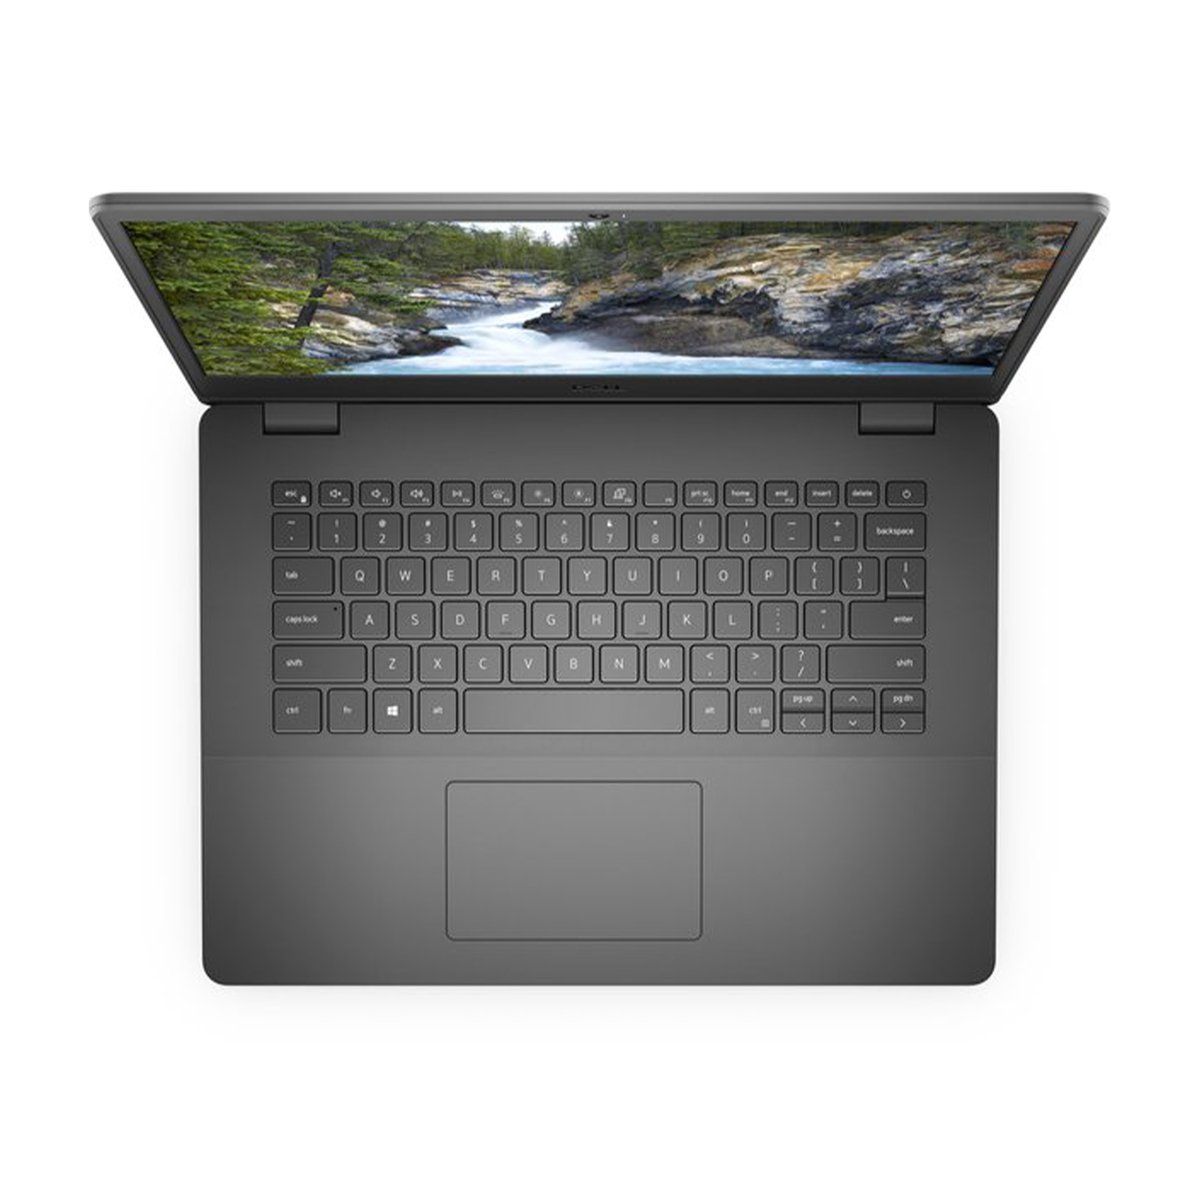 Dell Vostro 3400 Laptop,Intel Core i3-1115G4,4GB RAM,1TB HDD,Intel(R) UHD Graphics with shared graphics, 14.0inches HD Display,Win10,Black-[3400-VOS-4001]